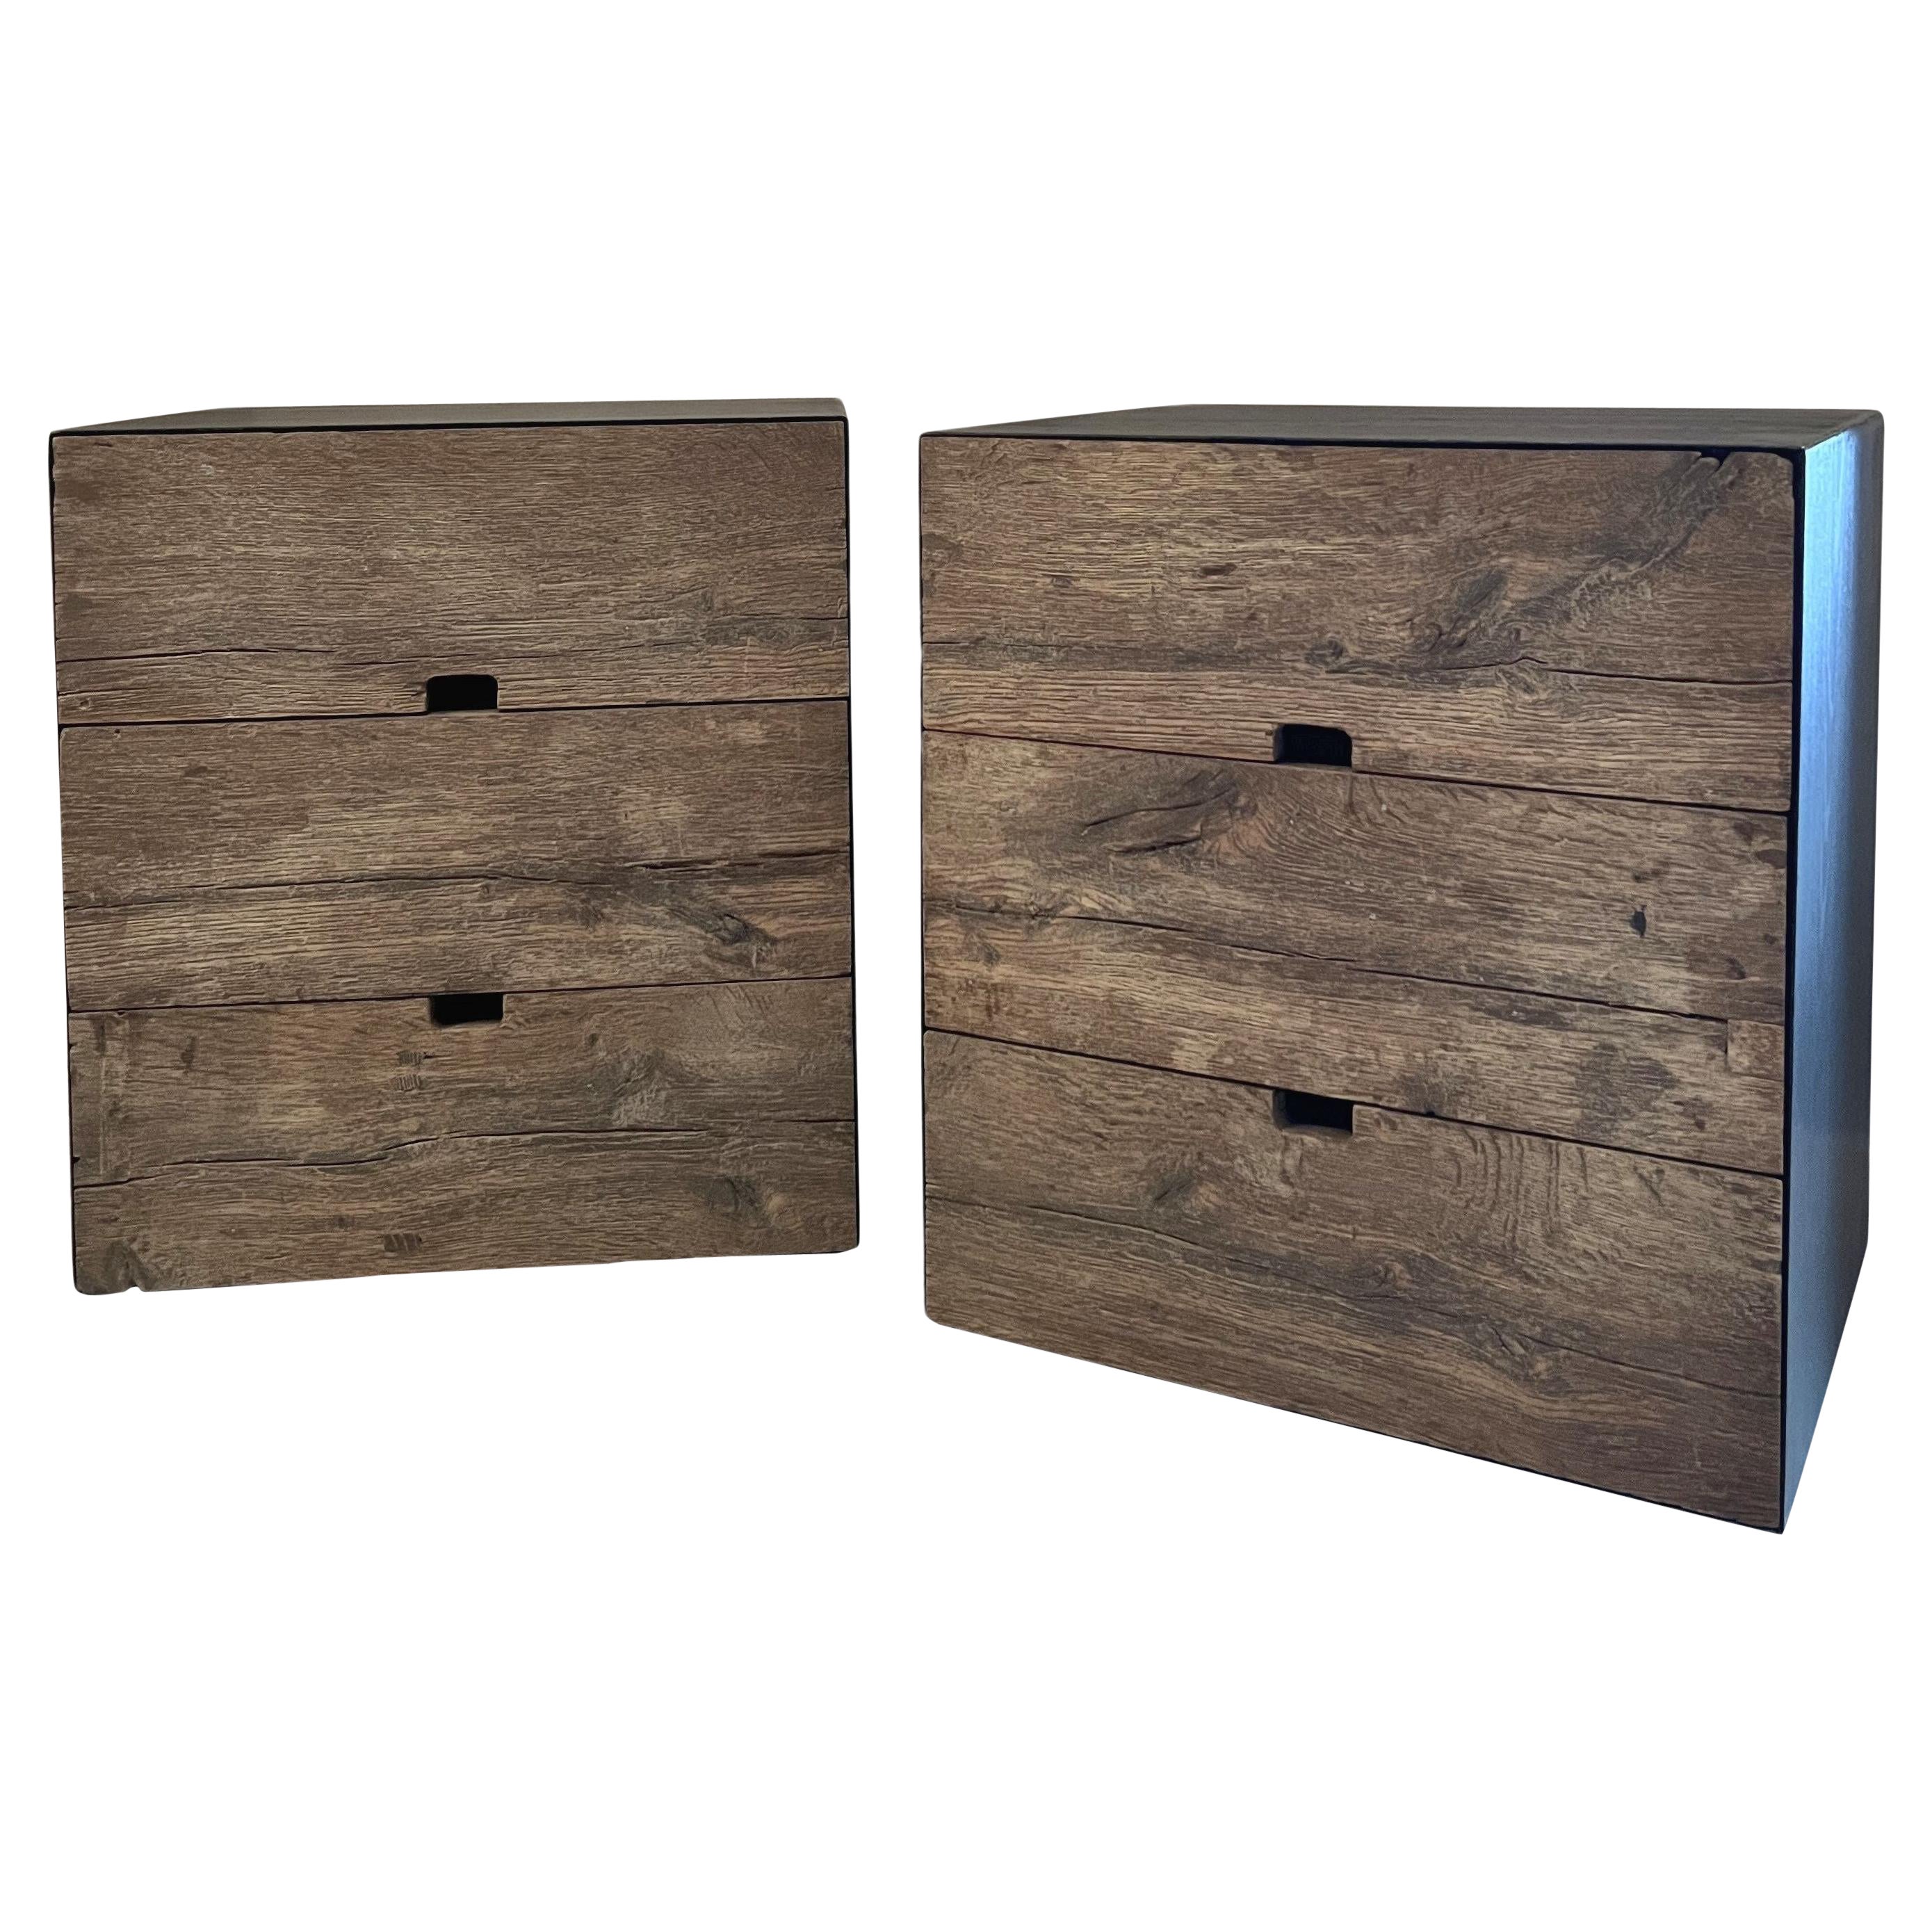 A Pair of Martin Nightstands Sidetables Recycled Old Oak